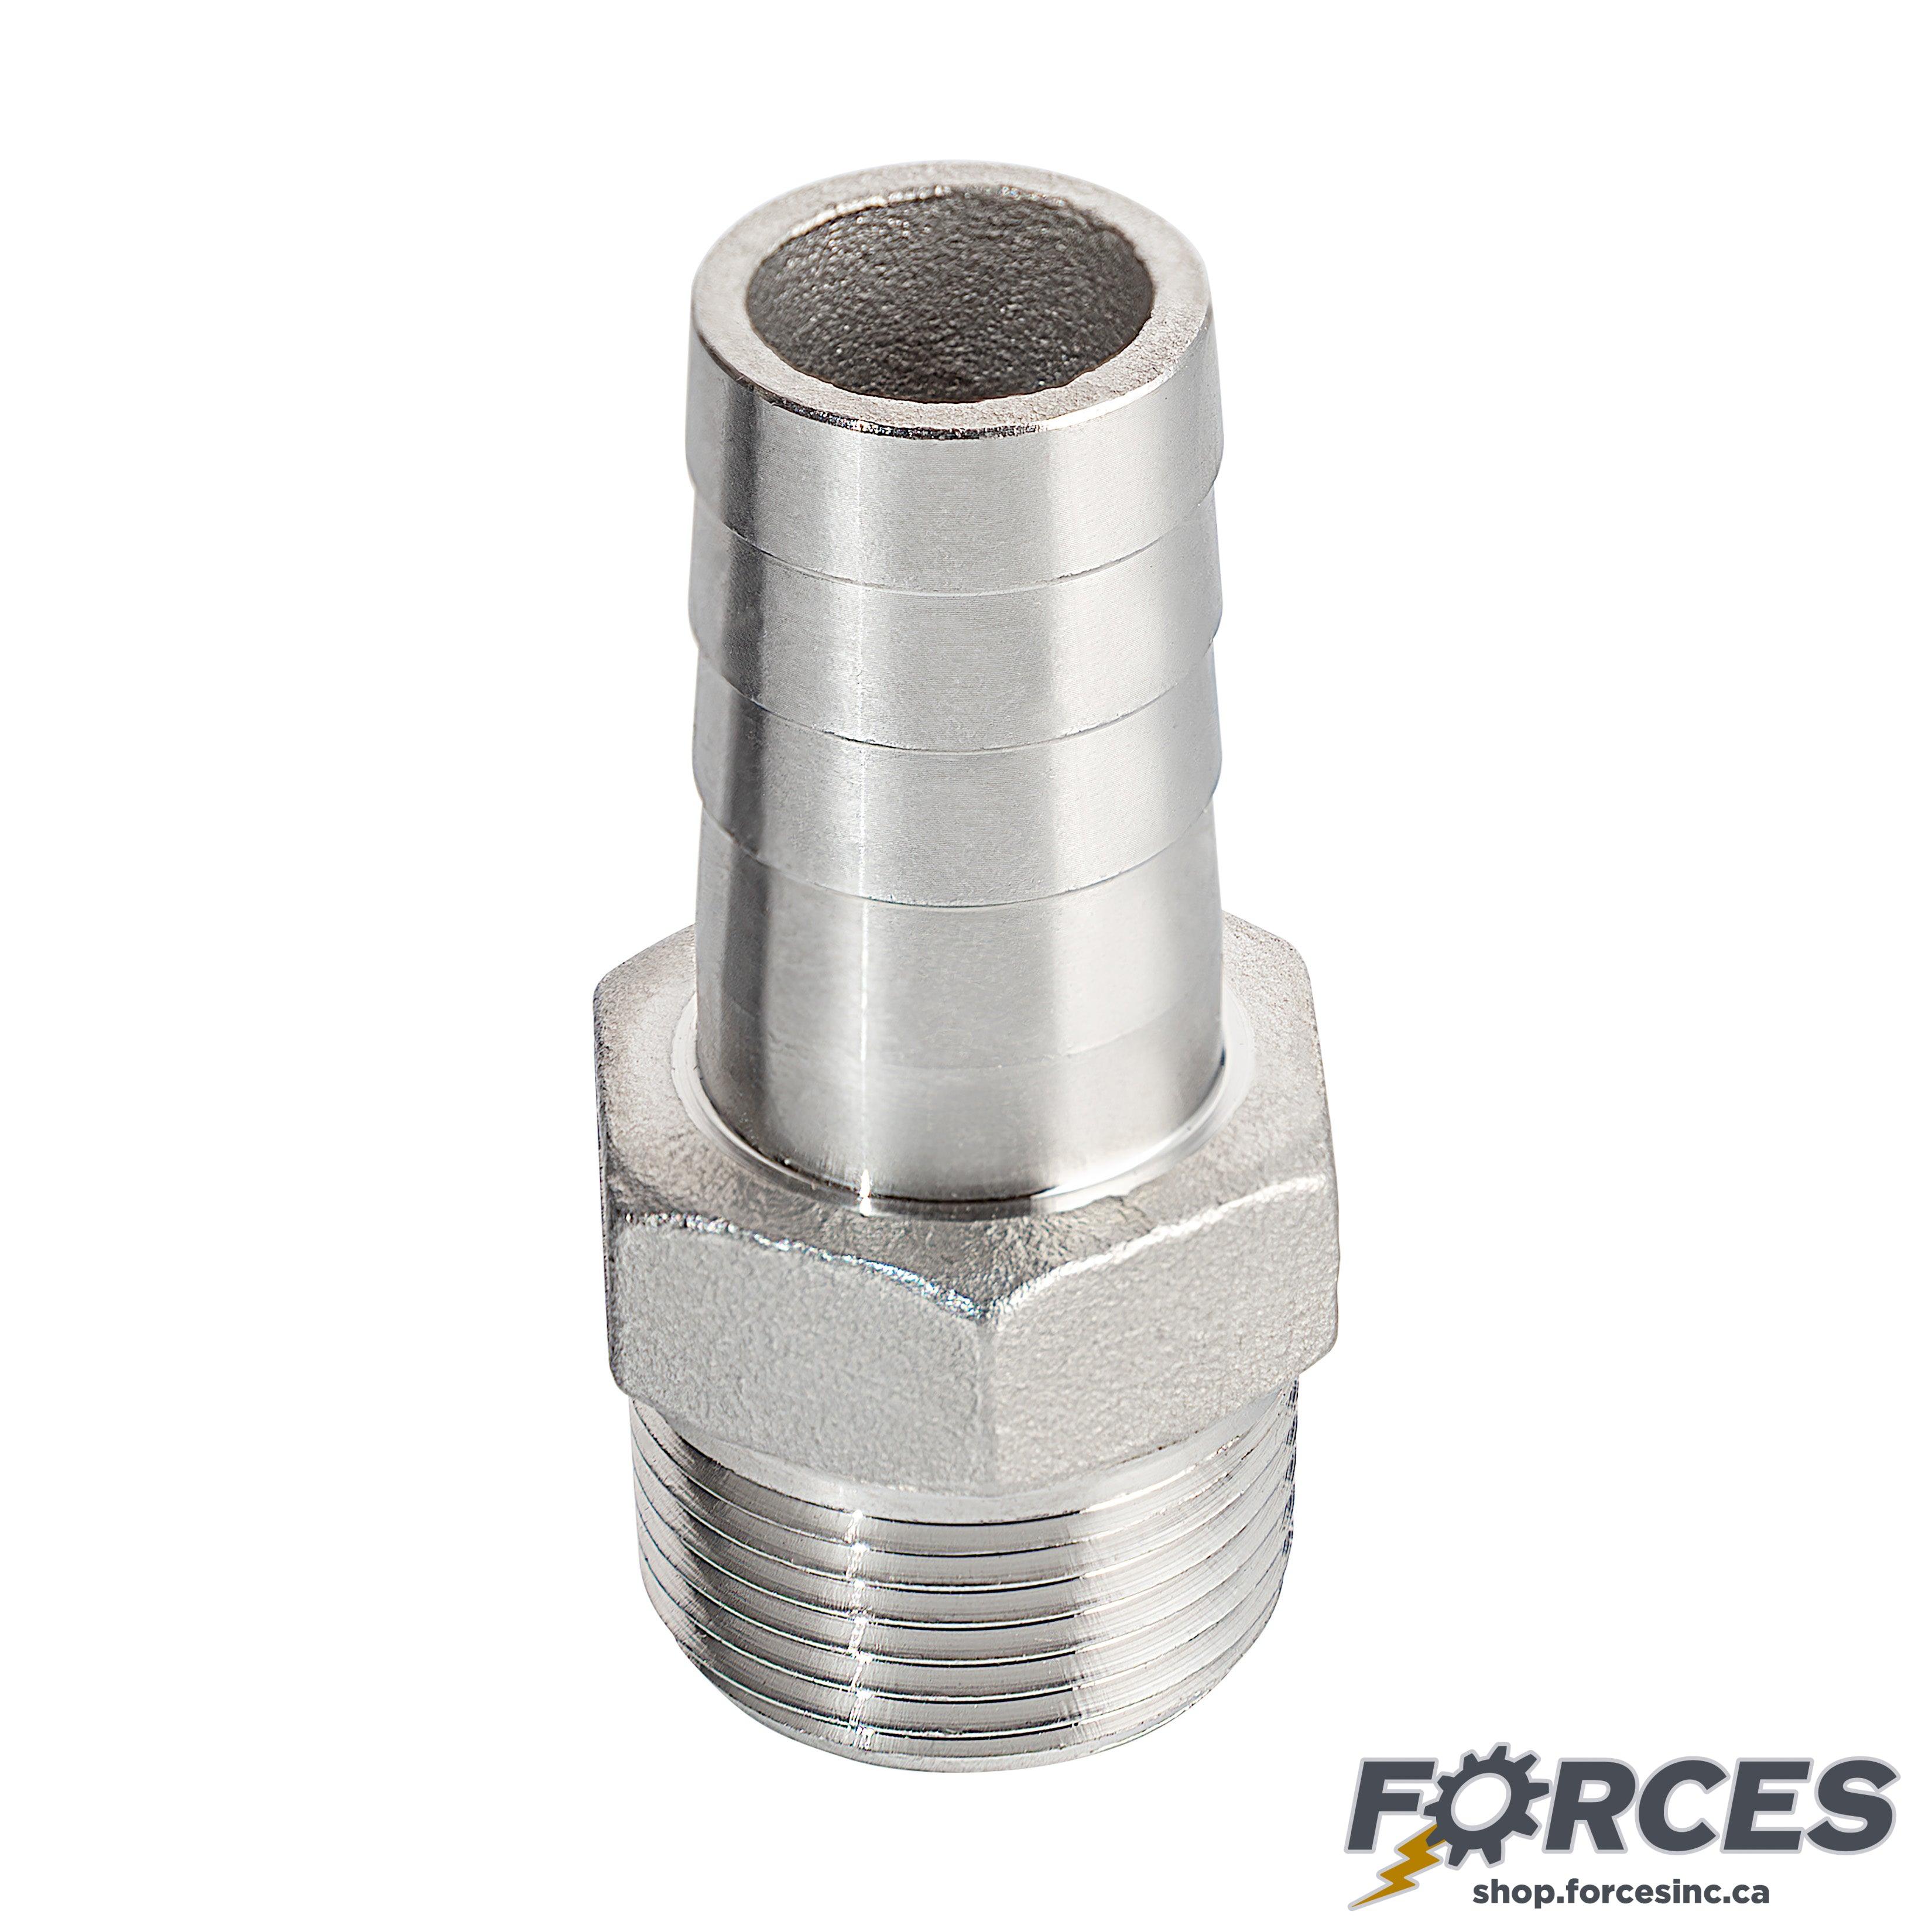 Hose Barb 3/4" x 3/4" NPT #150 - Stainless Steel 316 - Forces Inc